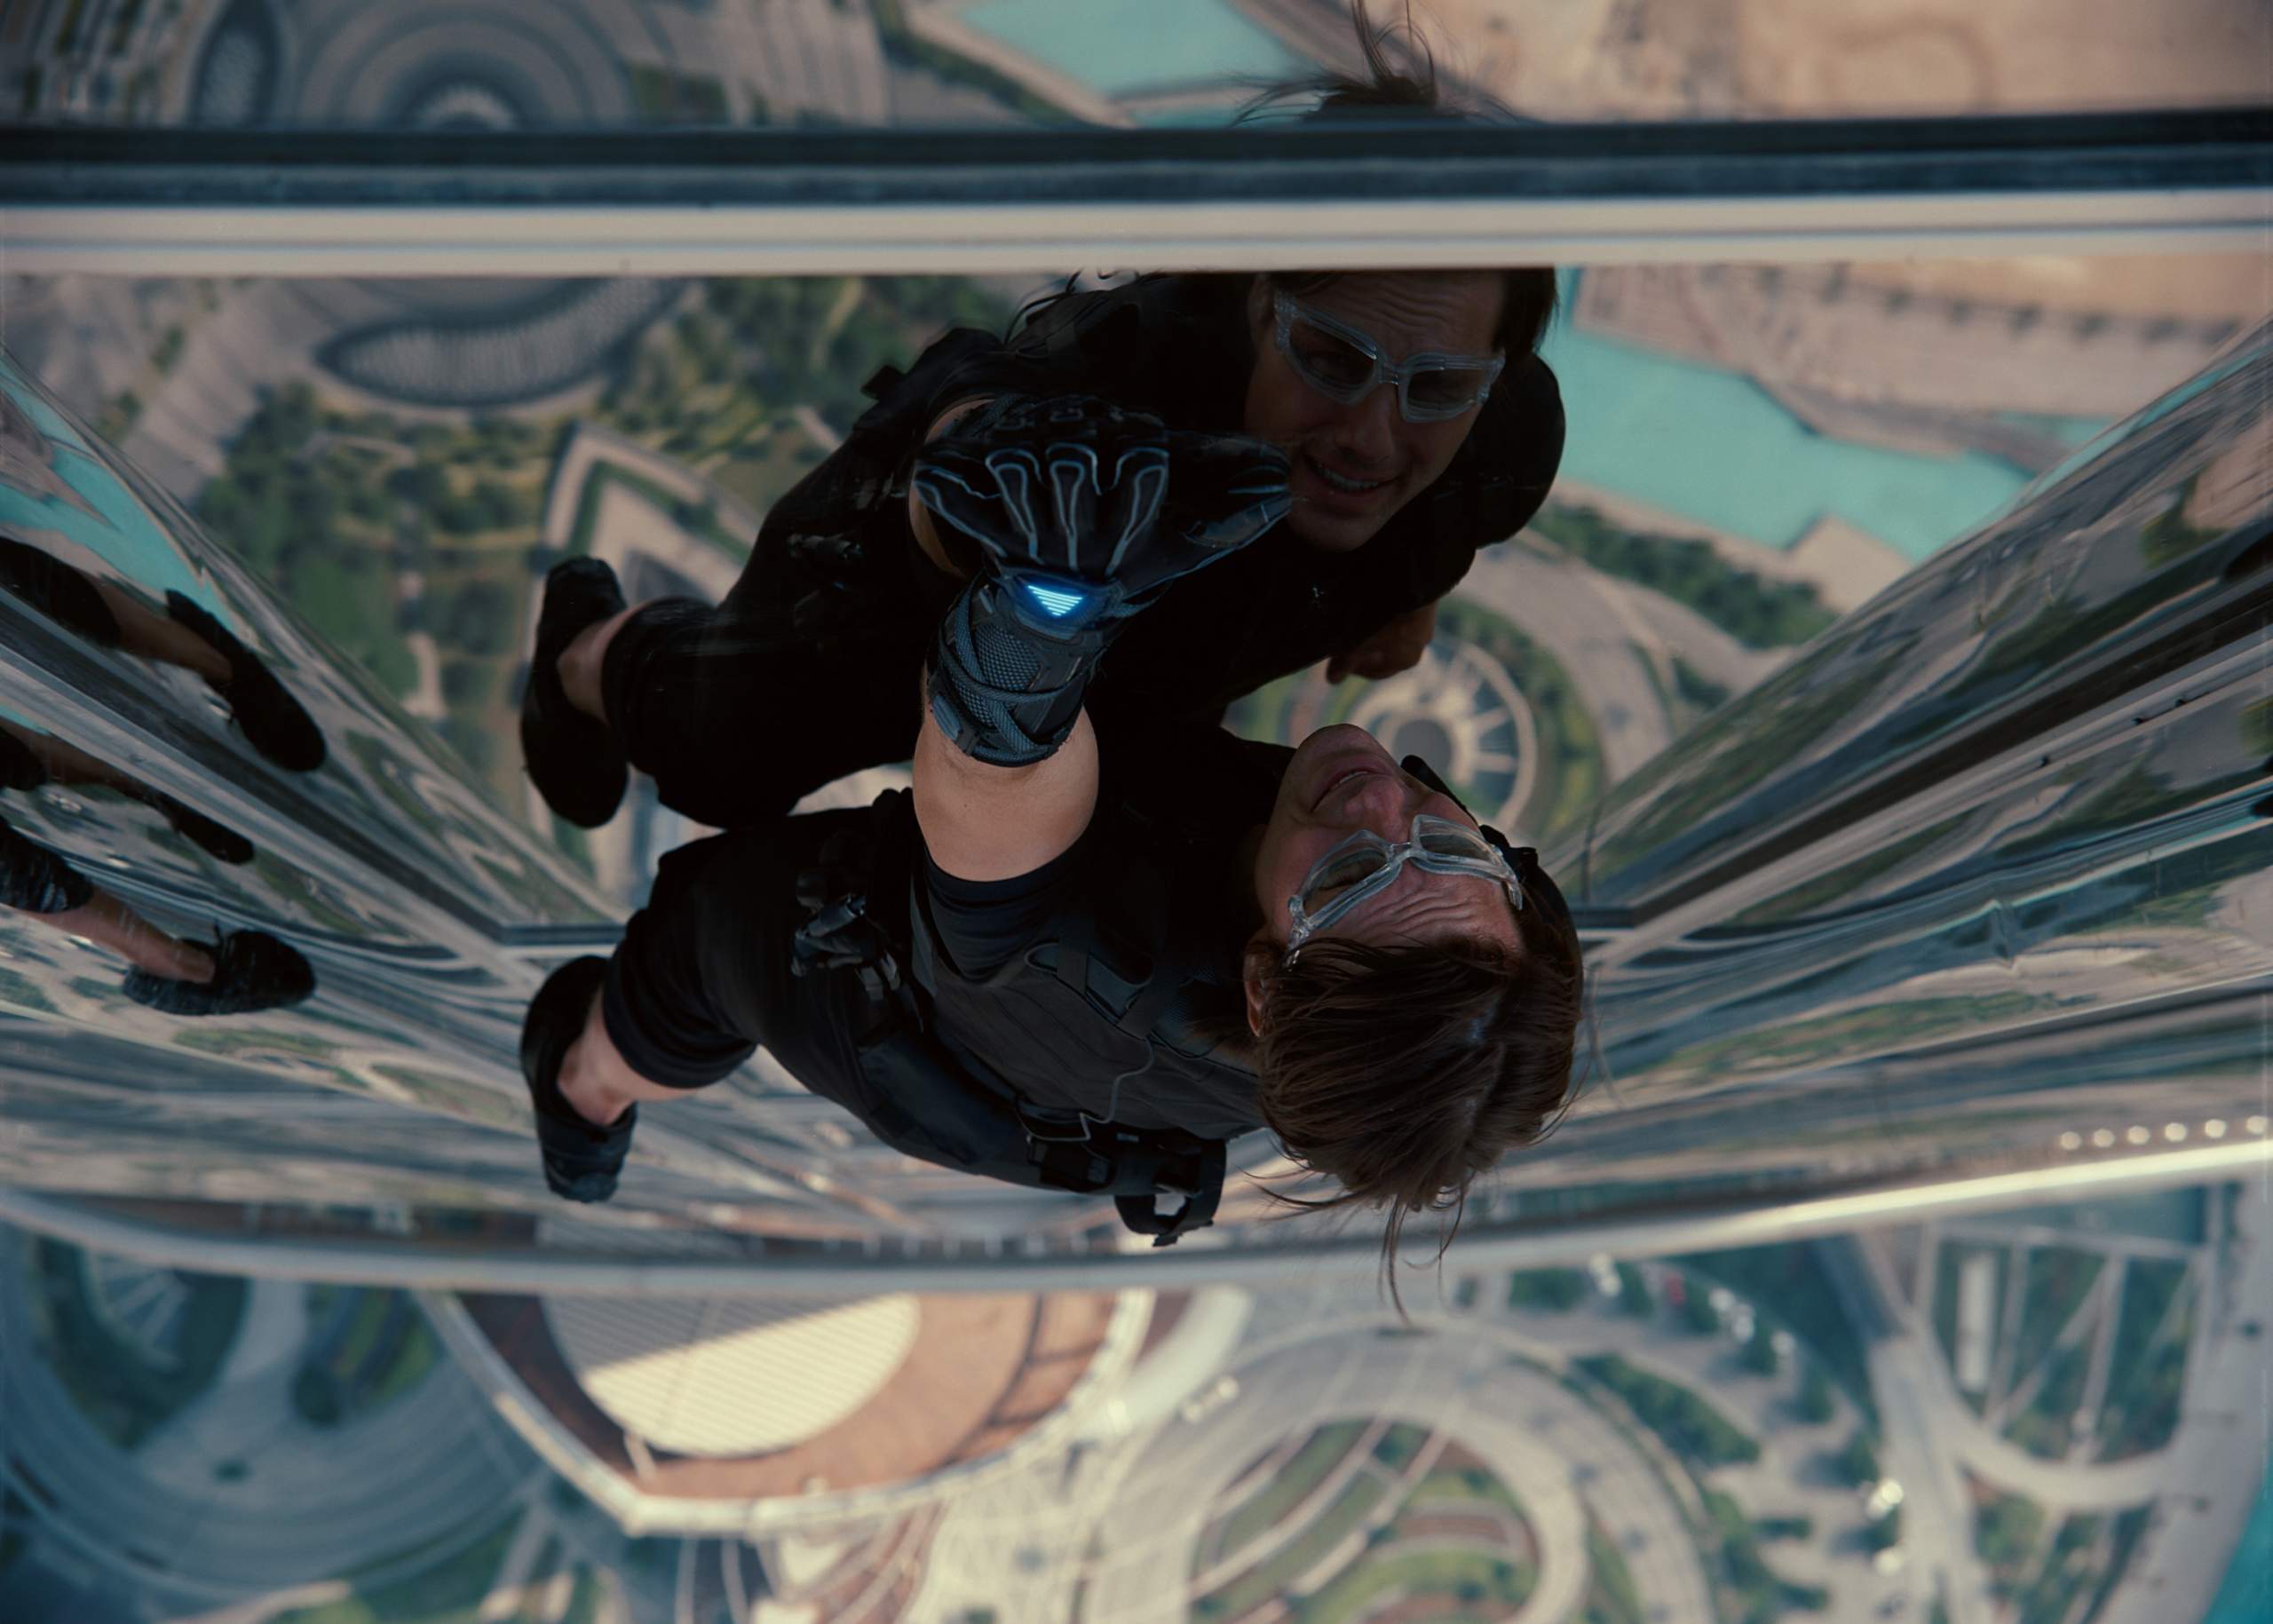 This is the fourth entry in the franchise and is adroitly directed by Brad Bird. It’s the one where they infiltrate the Kremlin and then later it explodes. It has the scene where Ethan Hunt has to free-climb the Burj Khalifa. How about that chase through the middle of a sandstorm? I’ll never forget when Hunt runs down the Burj Khalifa and ends up hanging out of a window. It's insane that Cruise performs most of these stunts himself.